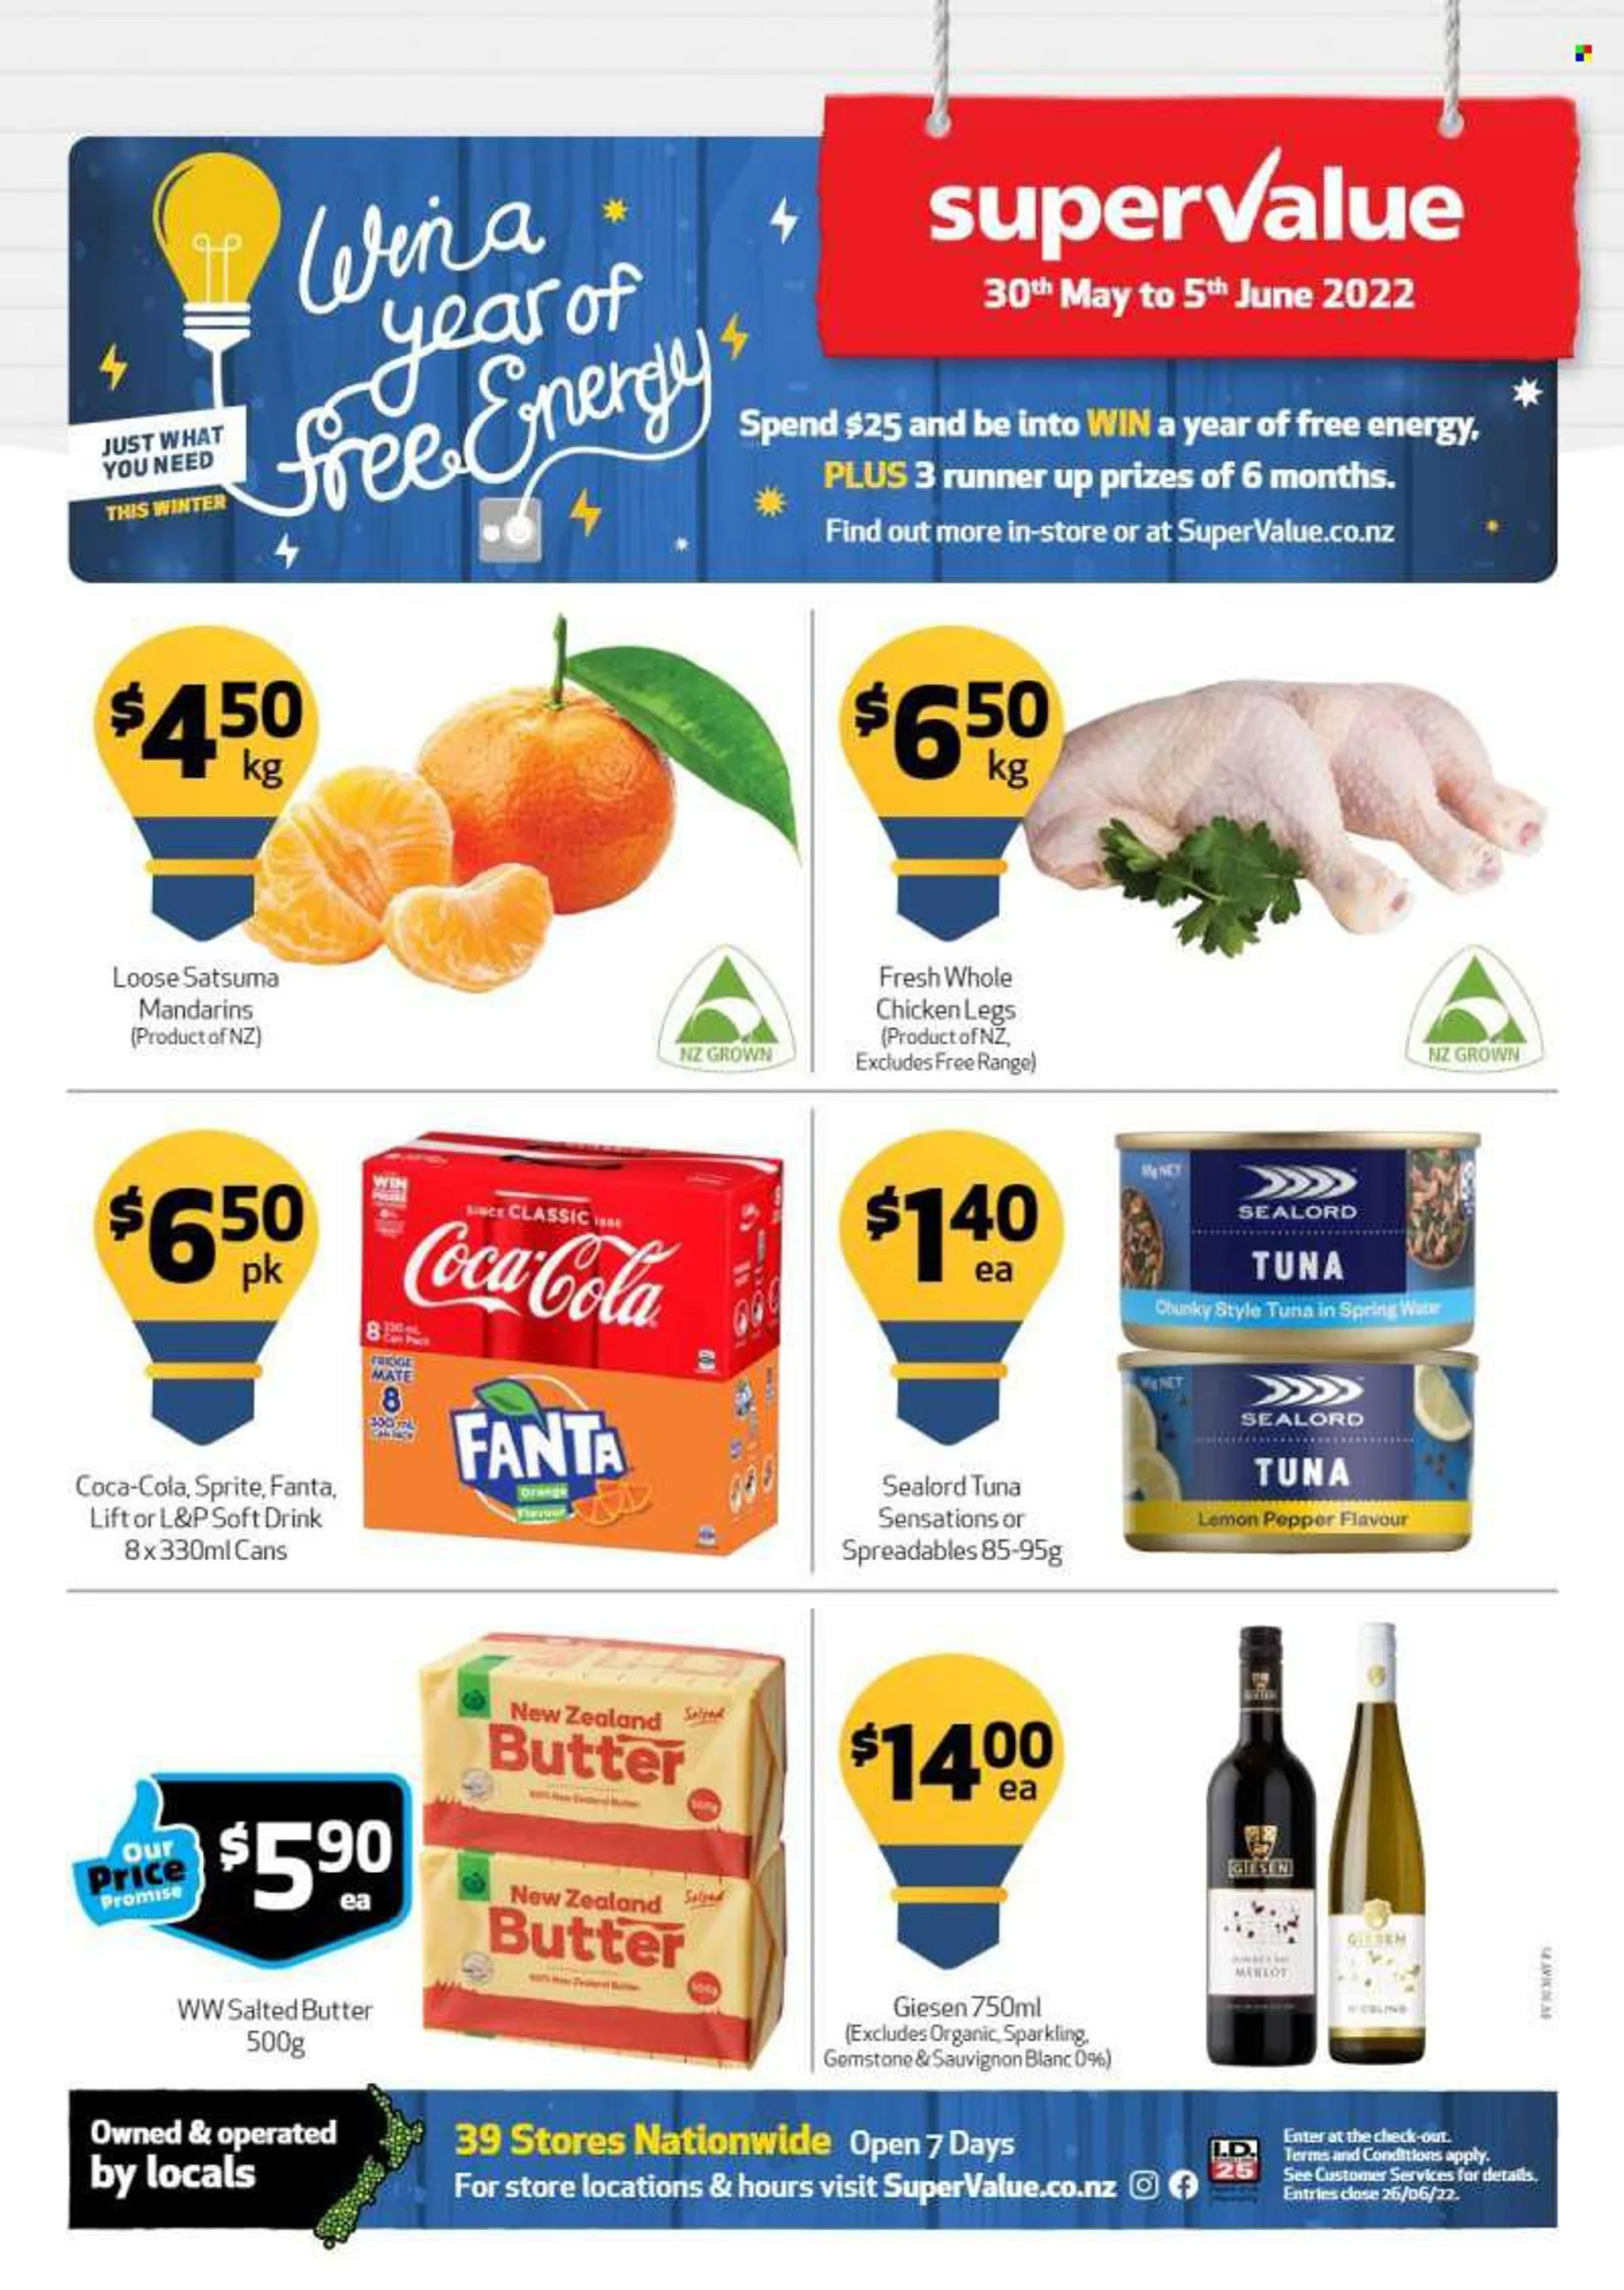 SuperValue mailer - 30.05.2022 - 05.06.2022. - 30 May 5 June 2022 - Page 1